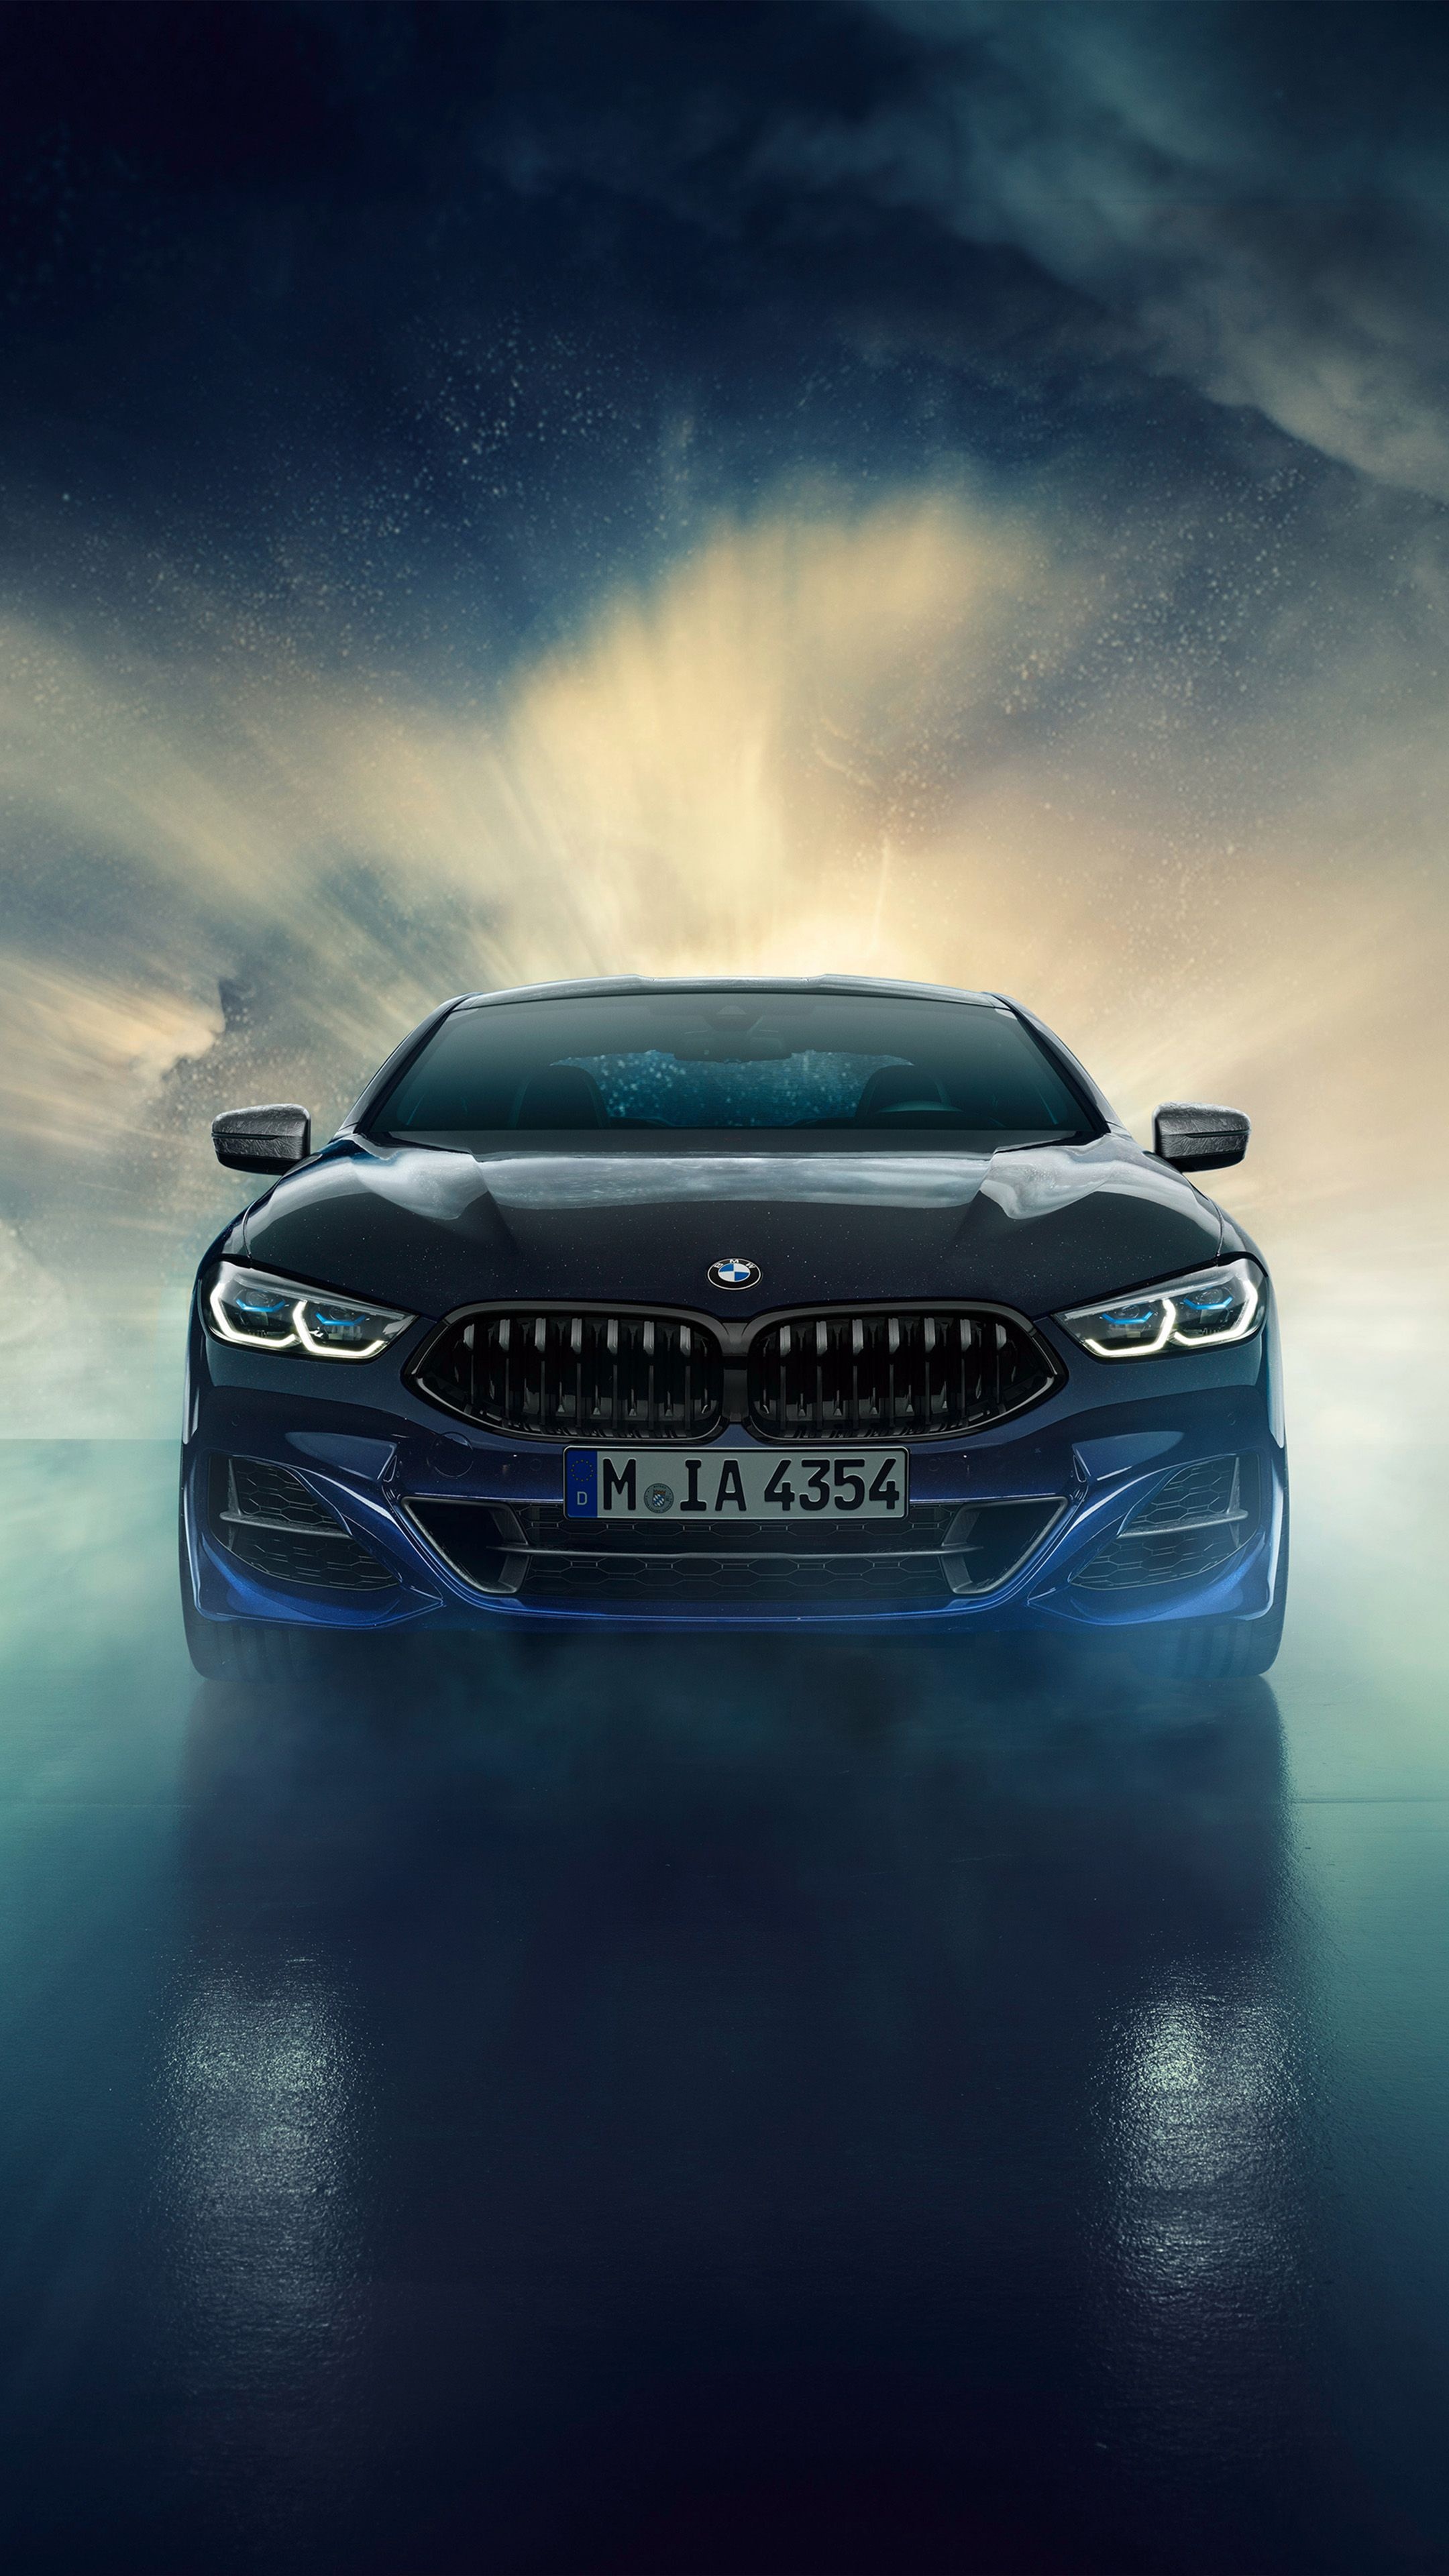 BMW 8 Series, Android wallpapers, Customizable backgrounds, Smartphone display, 2160x3840 4K Phone